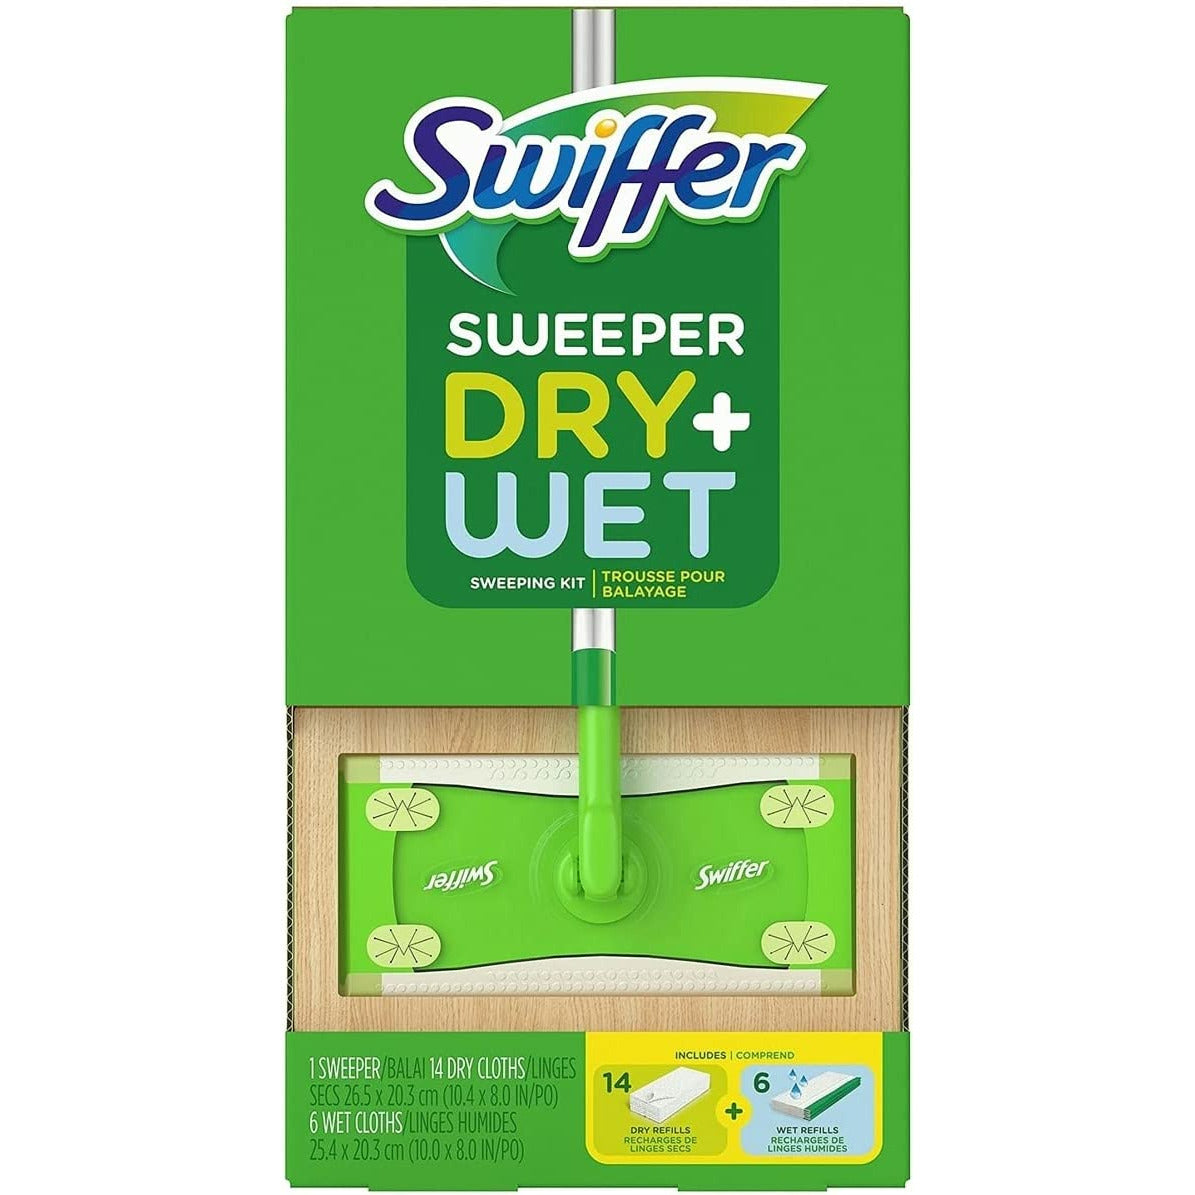 Swiffer Sweeper Dry + Wet Sweeping Kit - 1 Sweeper + 14 Dry Cloths + 6 Wet Cloths